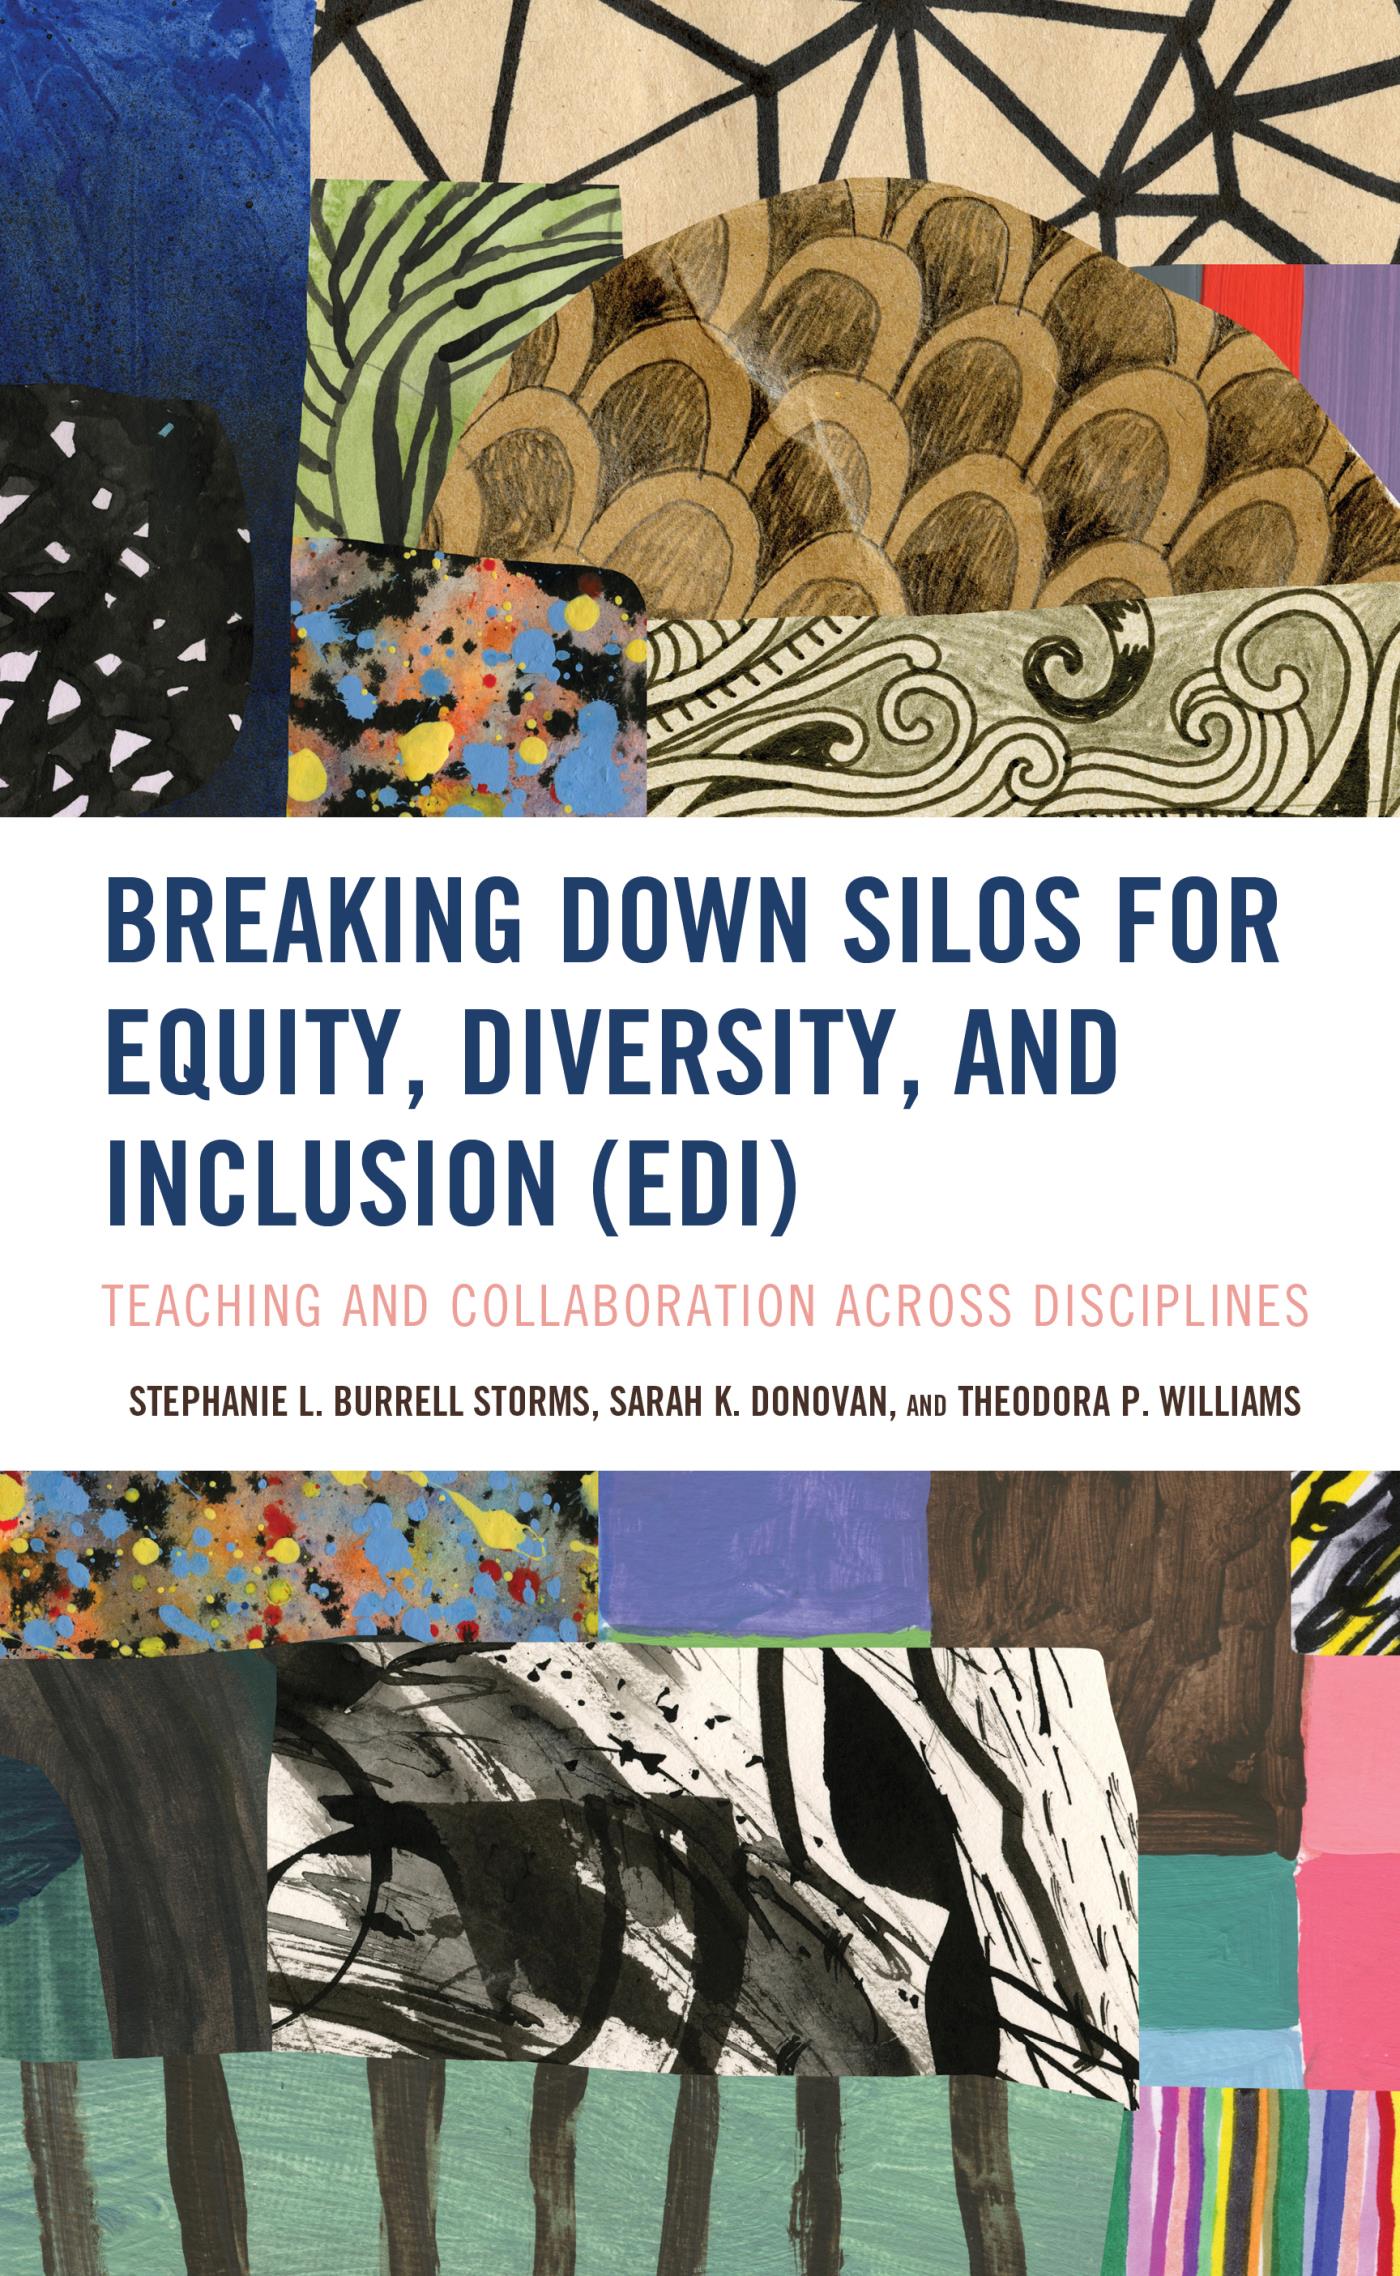 Breaking Down Silos for Equity, Diversity, and Inclusion (EDI)